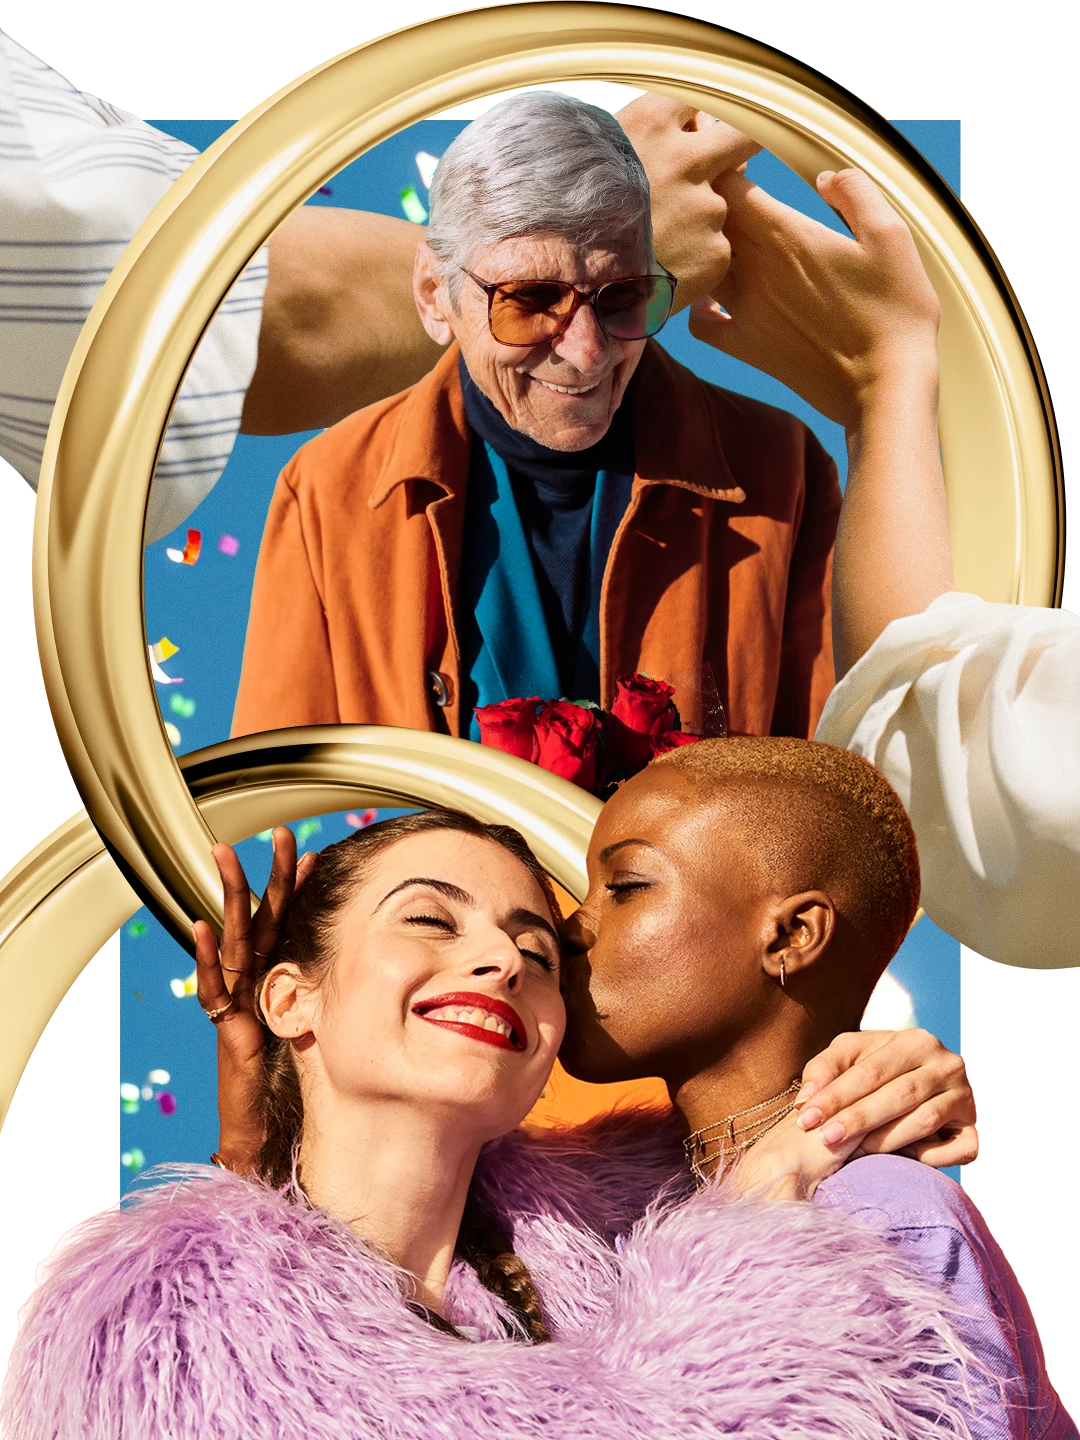 Collage of relationship themes. Two entangled wedding rings are in the centre. An older white man holding a bouquet of roses is behind an interracial queer couple, who are kissing on the cheek. White hands are joined in the background.
